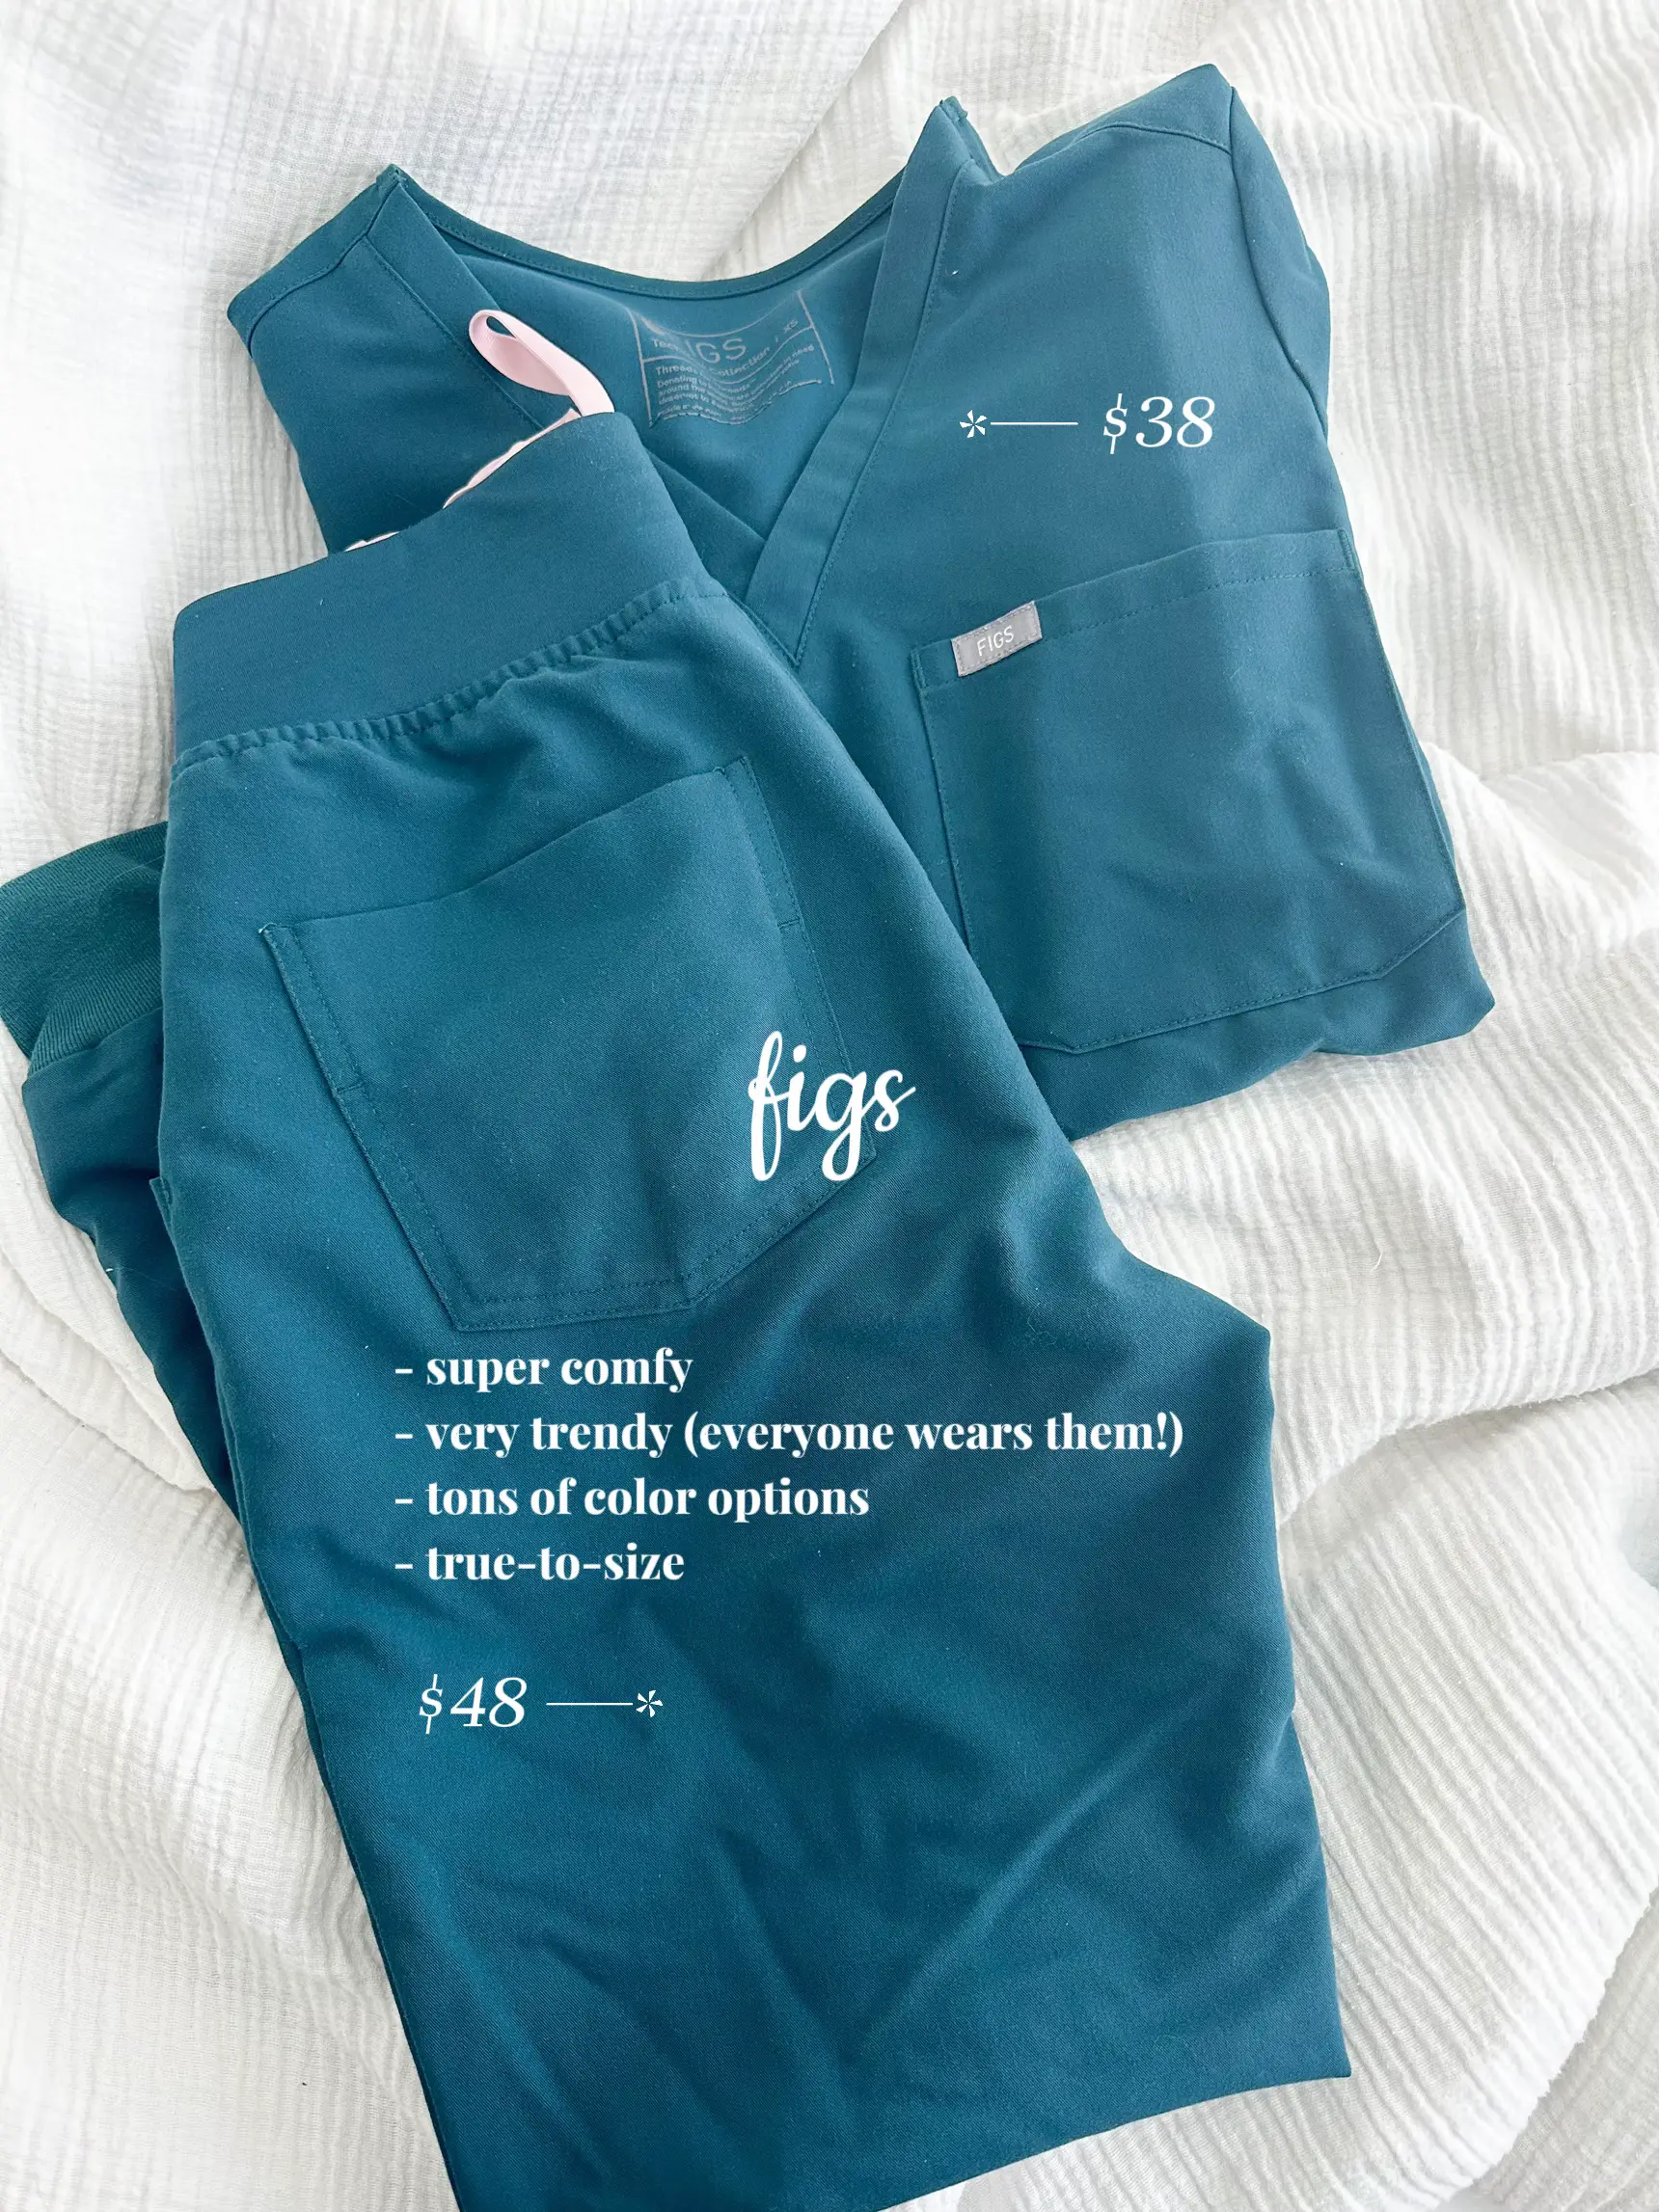 FIGS - Premium Scrubs, Lab Coats & Medical Apparel  Scrub suit design,  Medical scrubs outfit, Church outfit casual